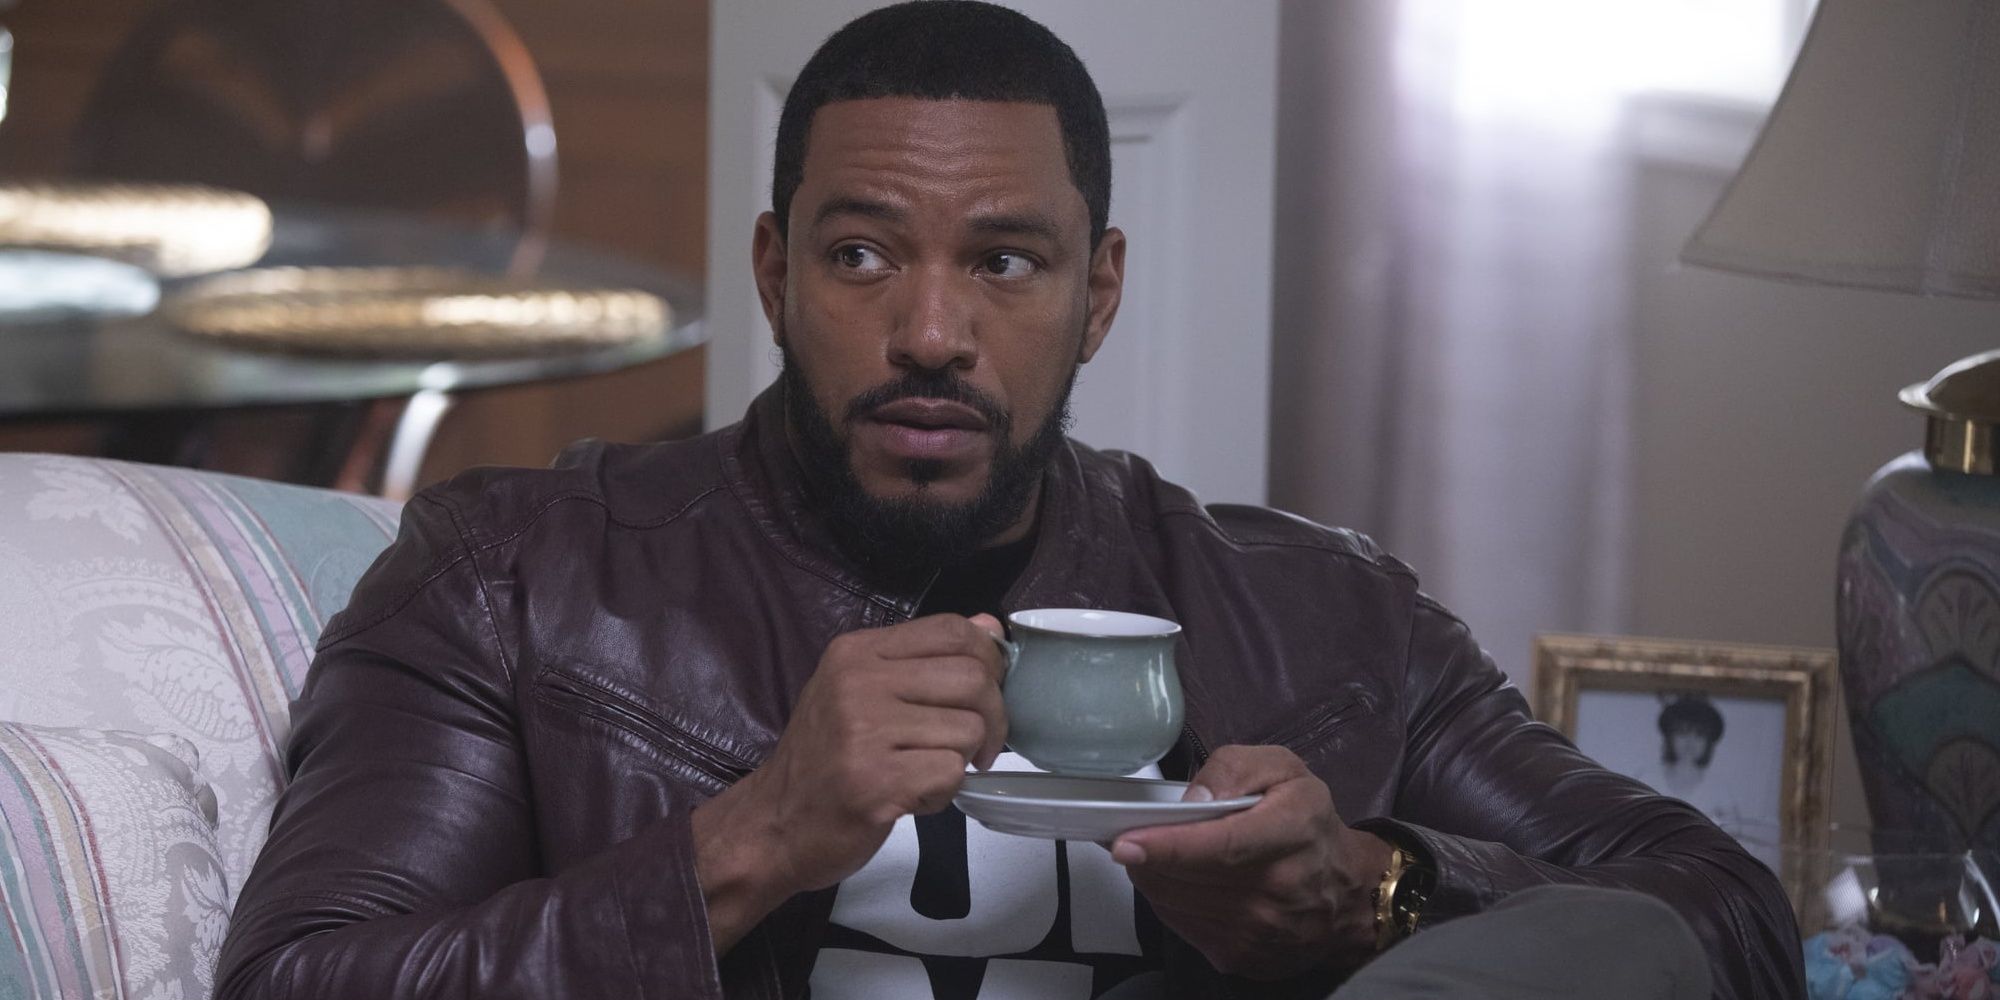 Laz Alonso as Mothers Milk in The Boys Cropped